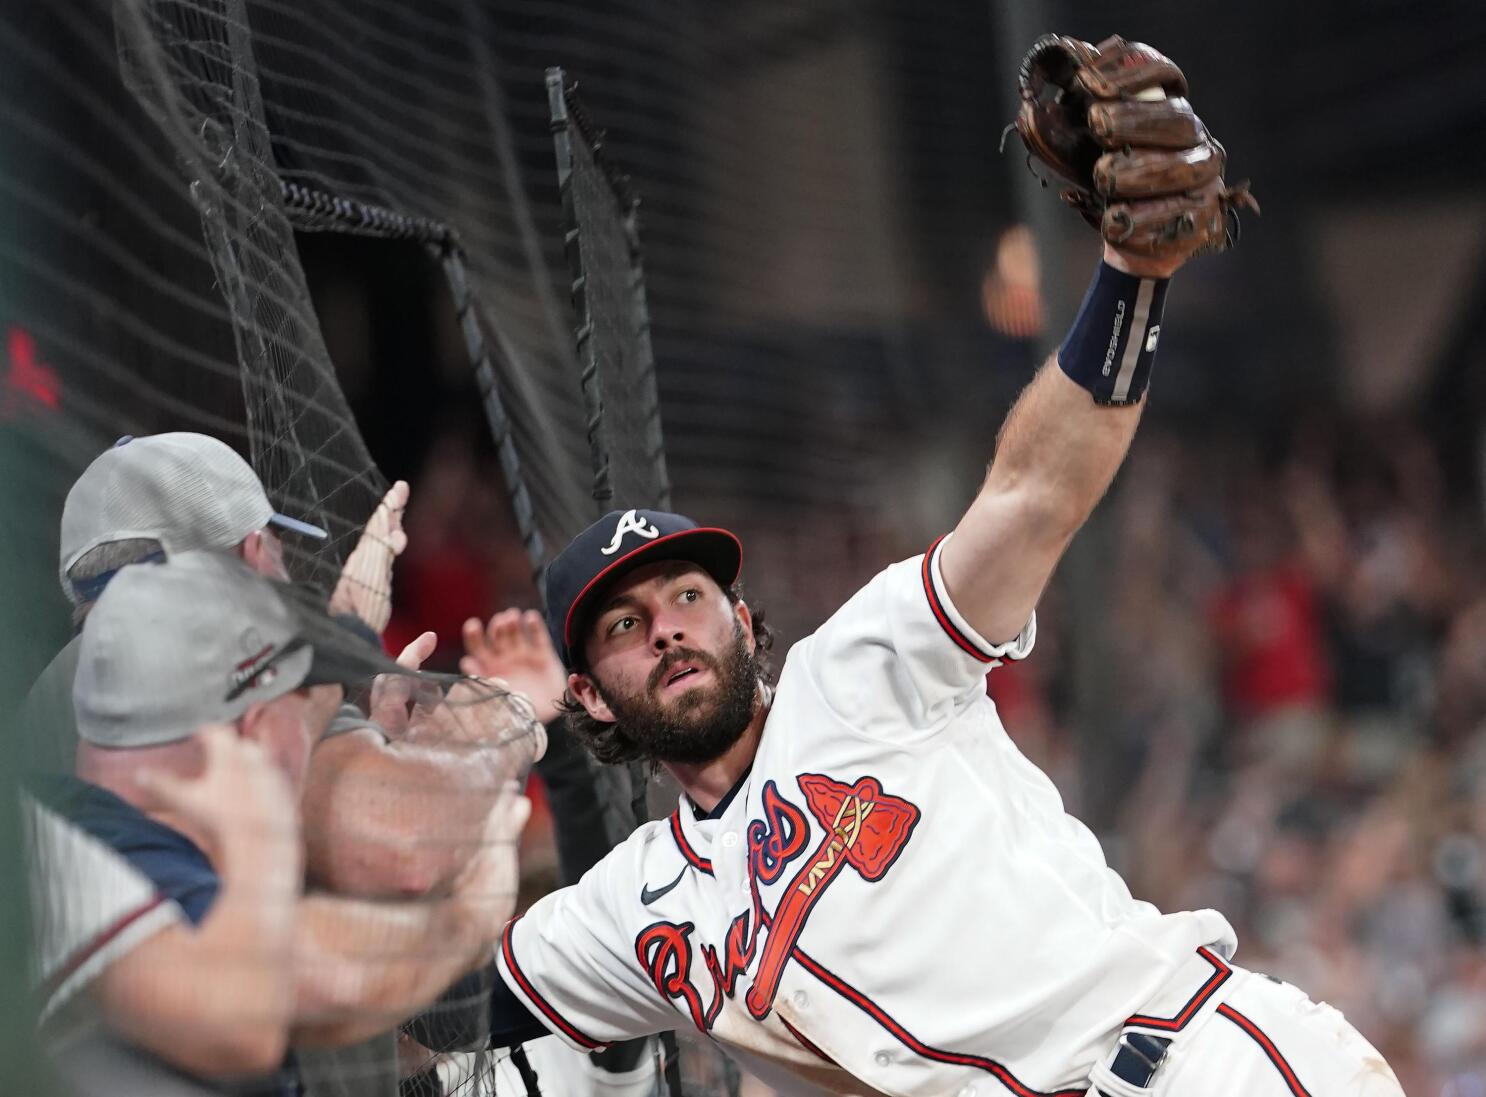 Dansby Swanson Has Atlanta Braves Surging in NL East - The New